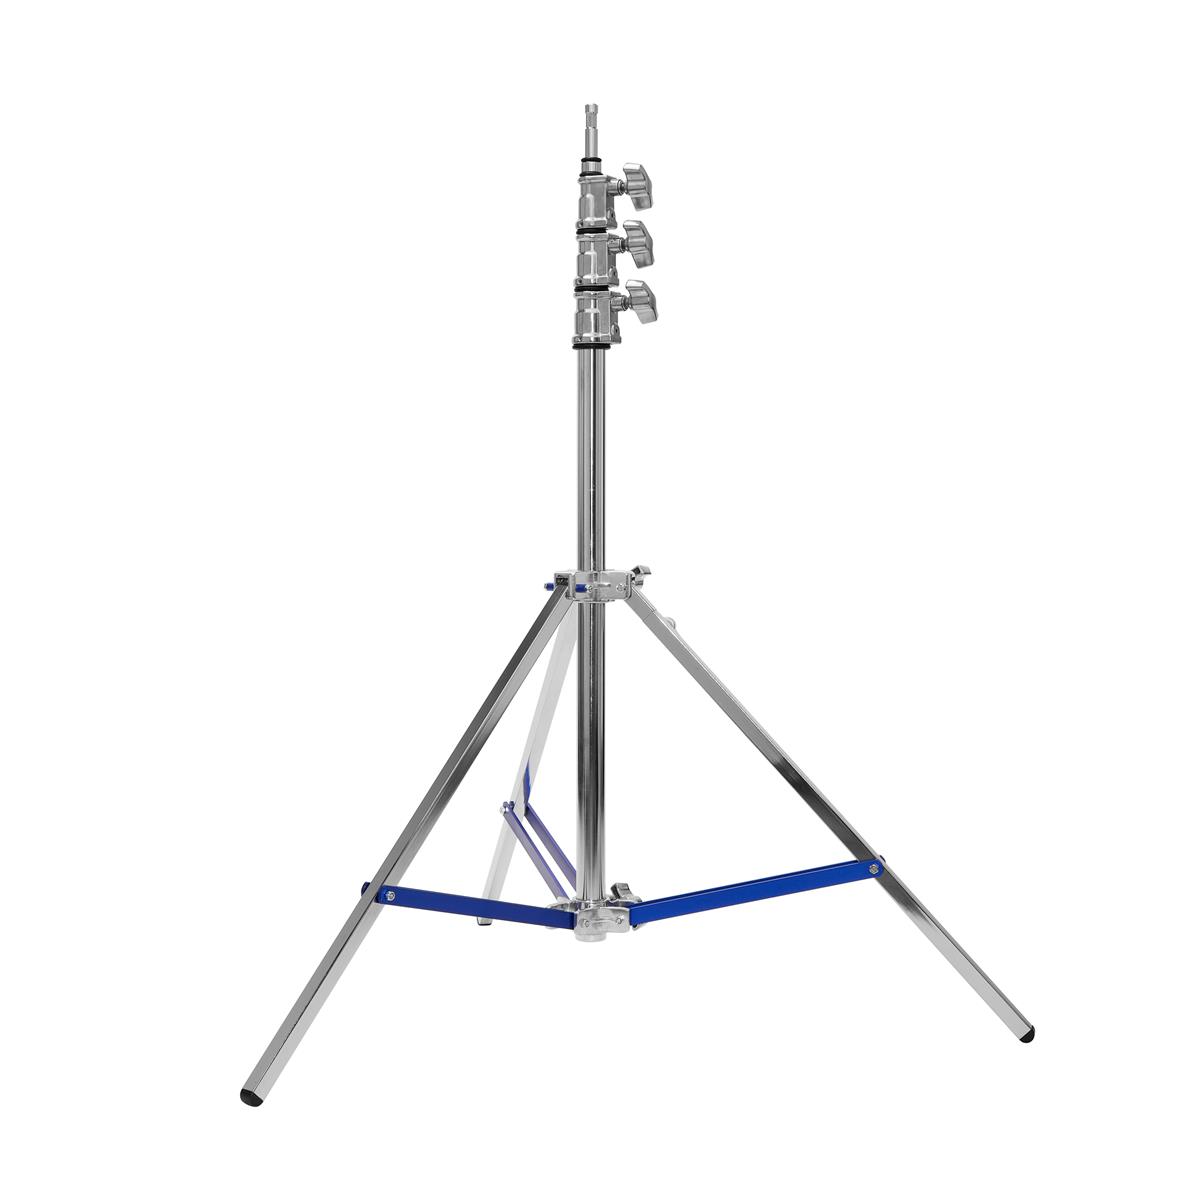 Flashpoint 9.9' Light Stand Pro with Leveling Leg, Silver